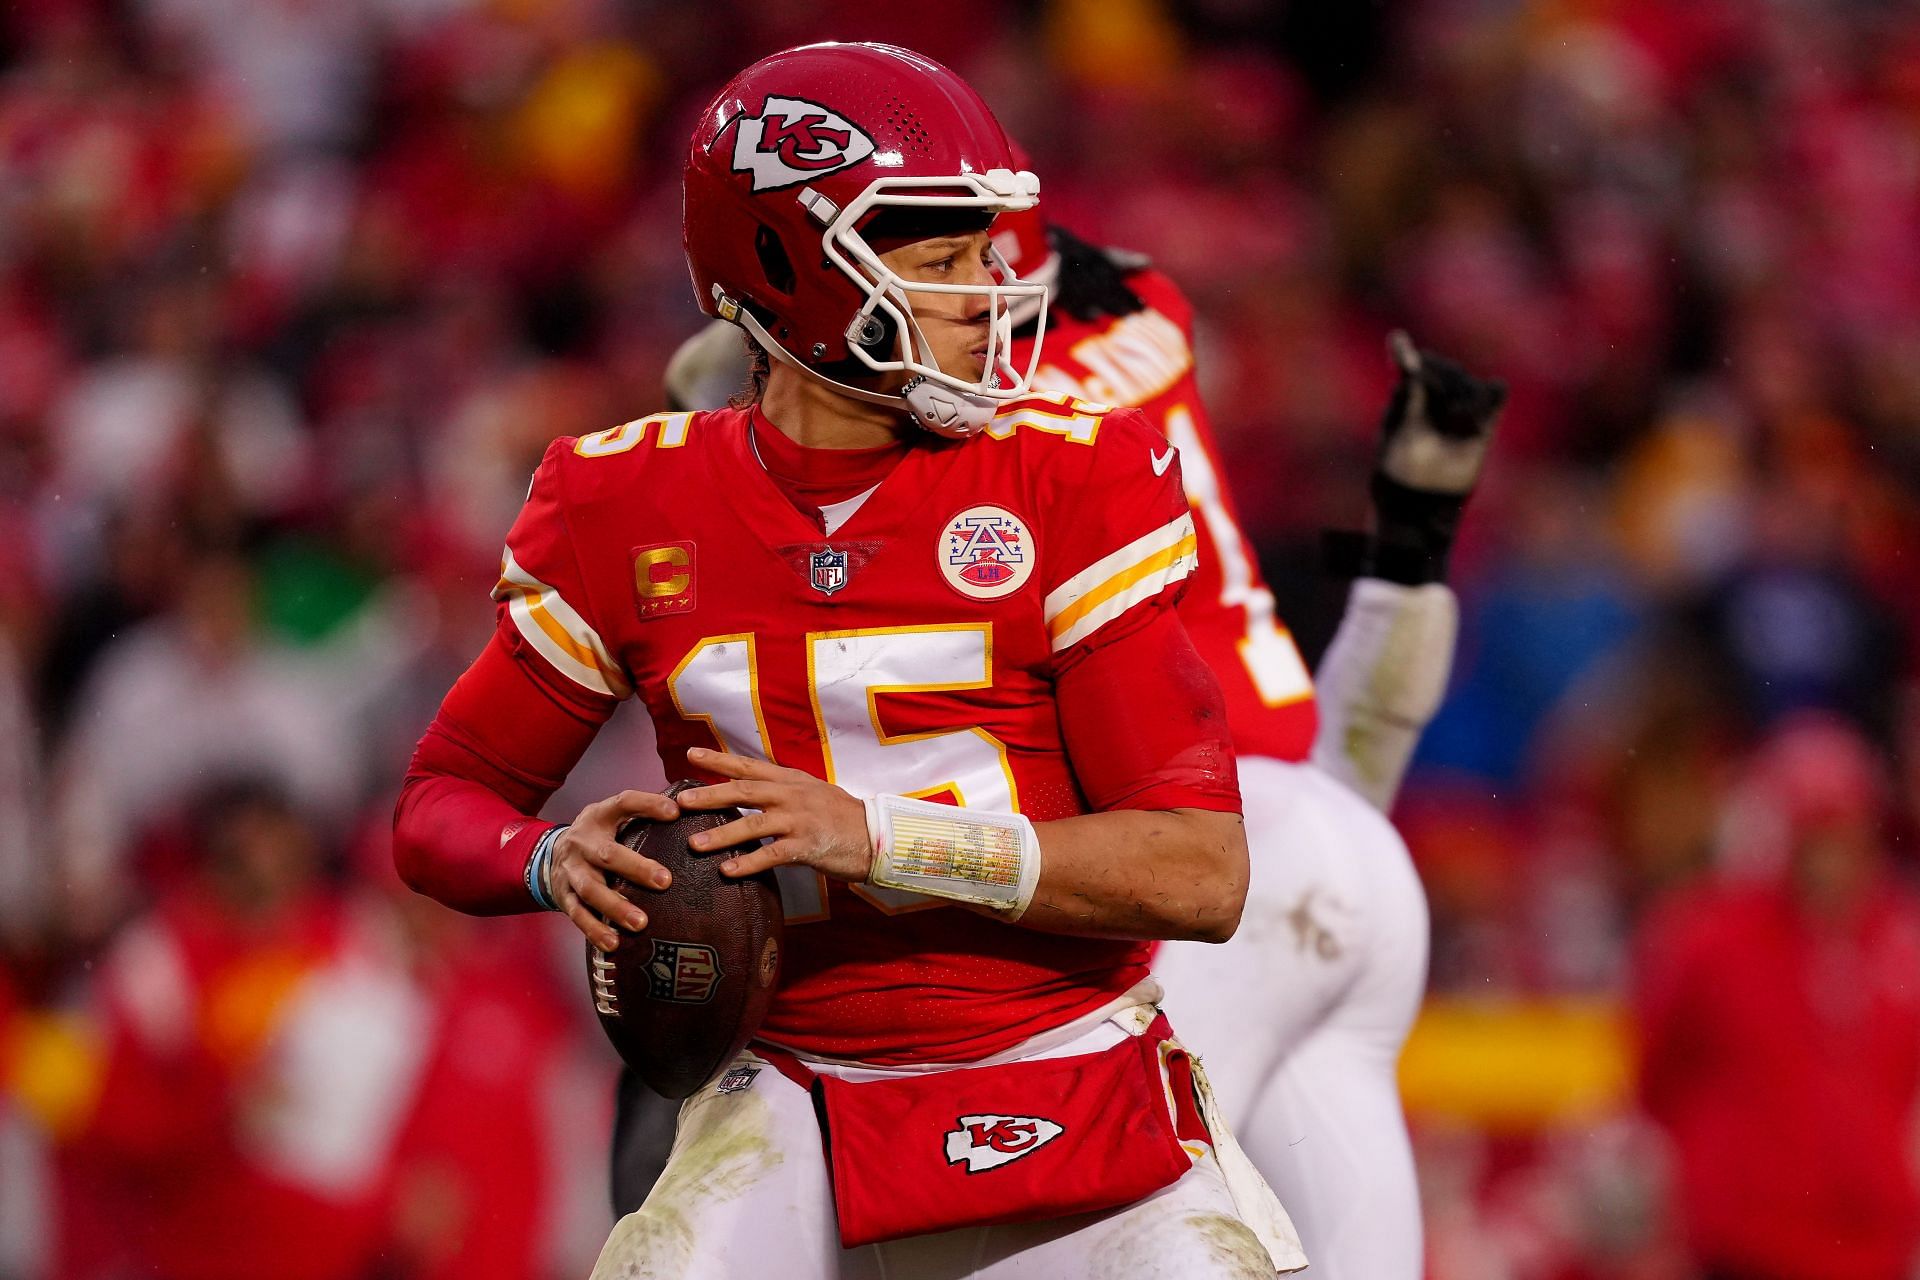 Patrick Mahomes has played to a level that deserves a second MVP award